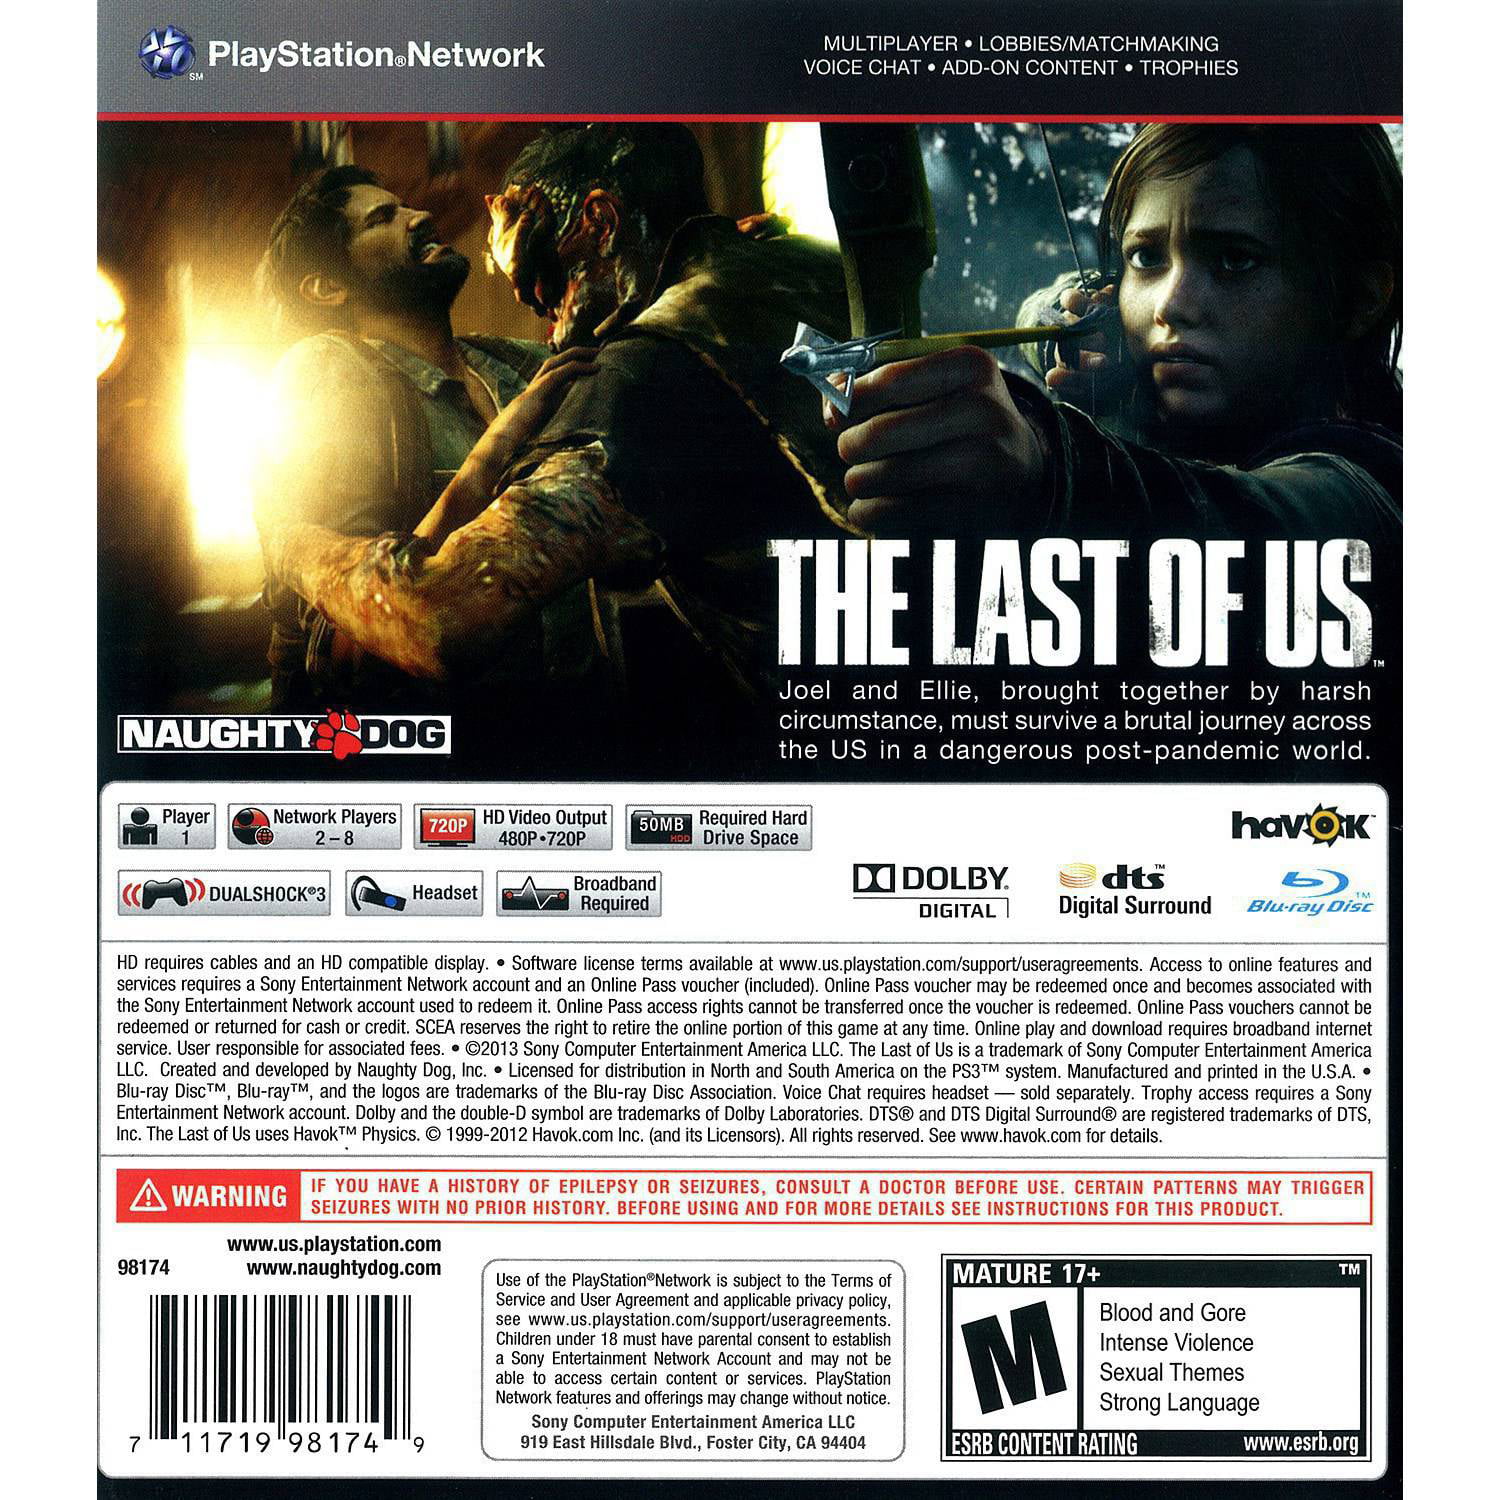 Ps3 old. The last of us ps3 диск. The last of us на пс3. Last of us ps3 Disc. The last of us ps3 Cover.